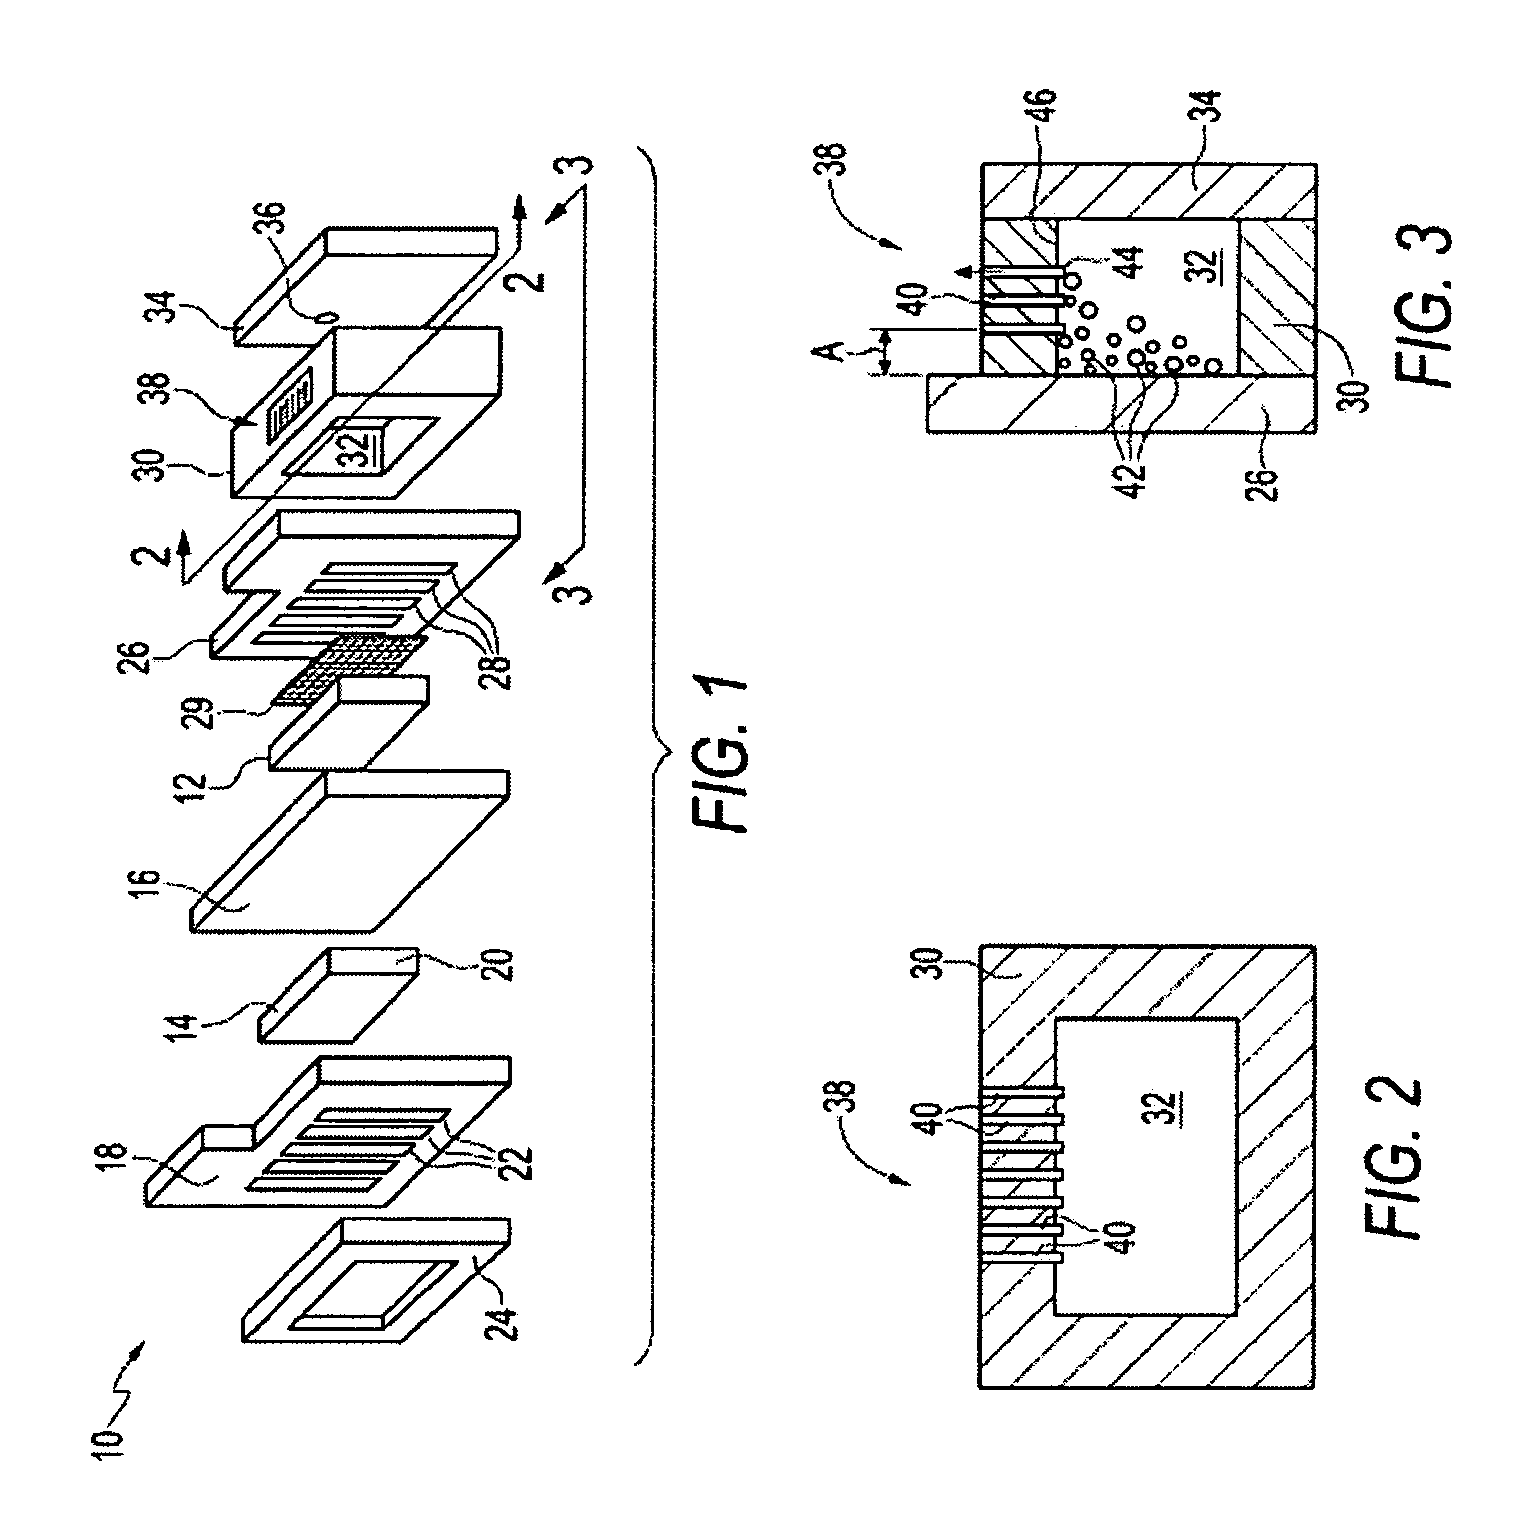 Low contaminant formic acid fuel for direct liquid fuel cell